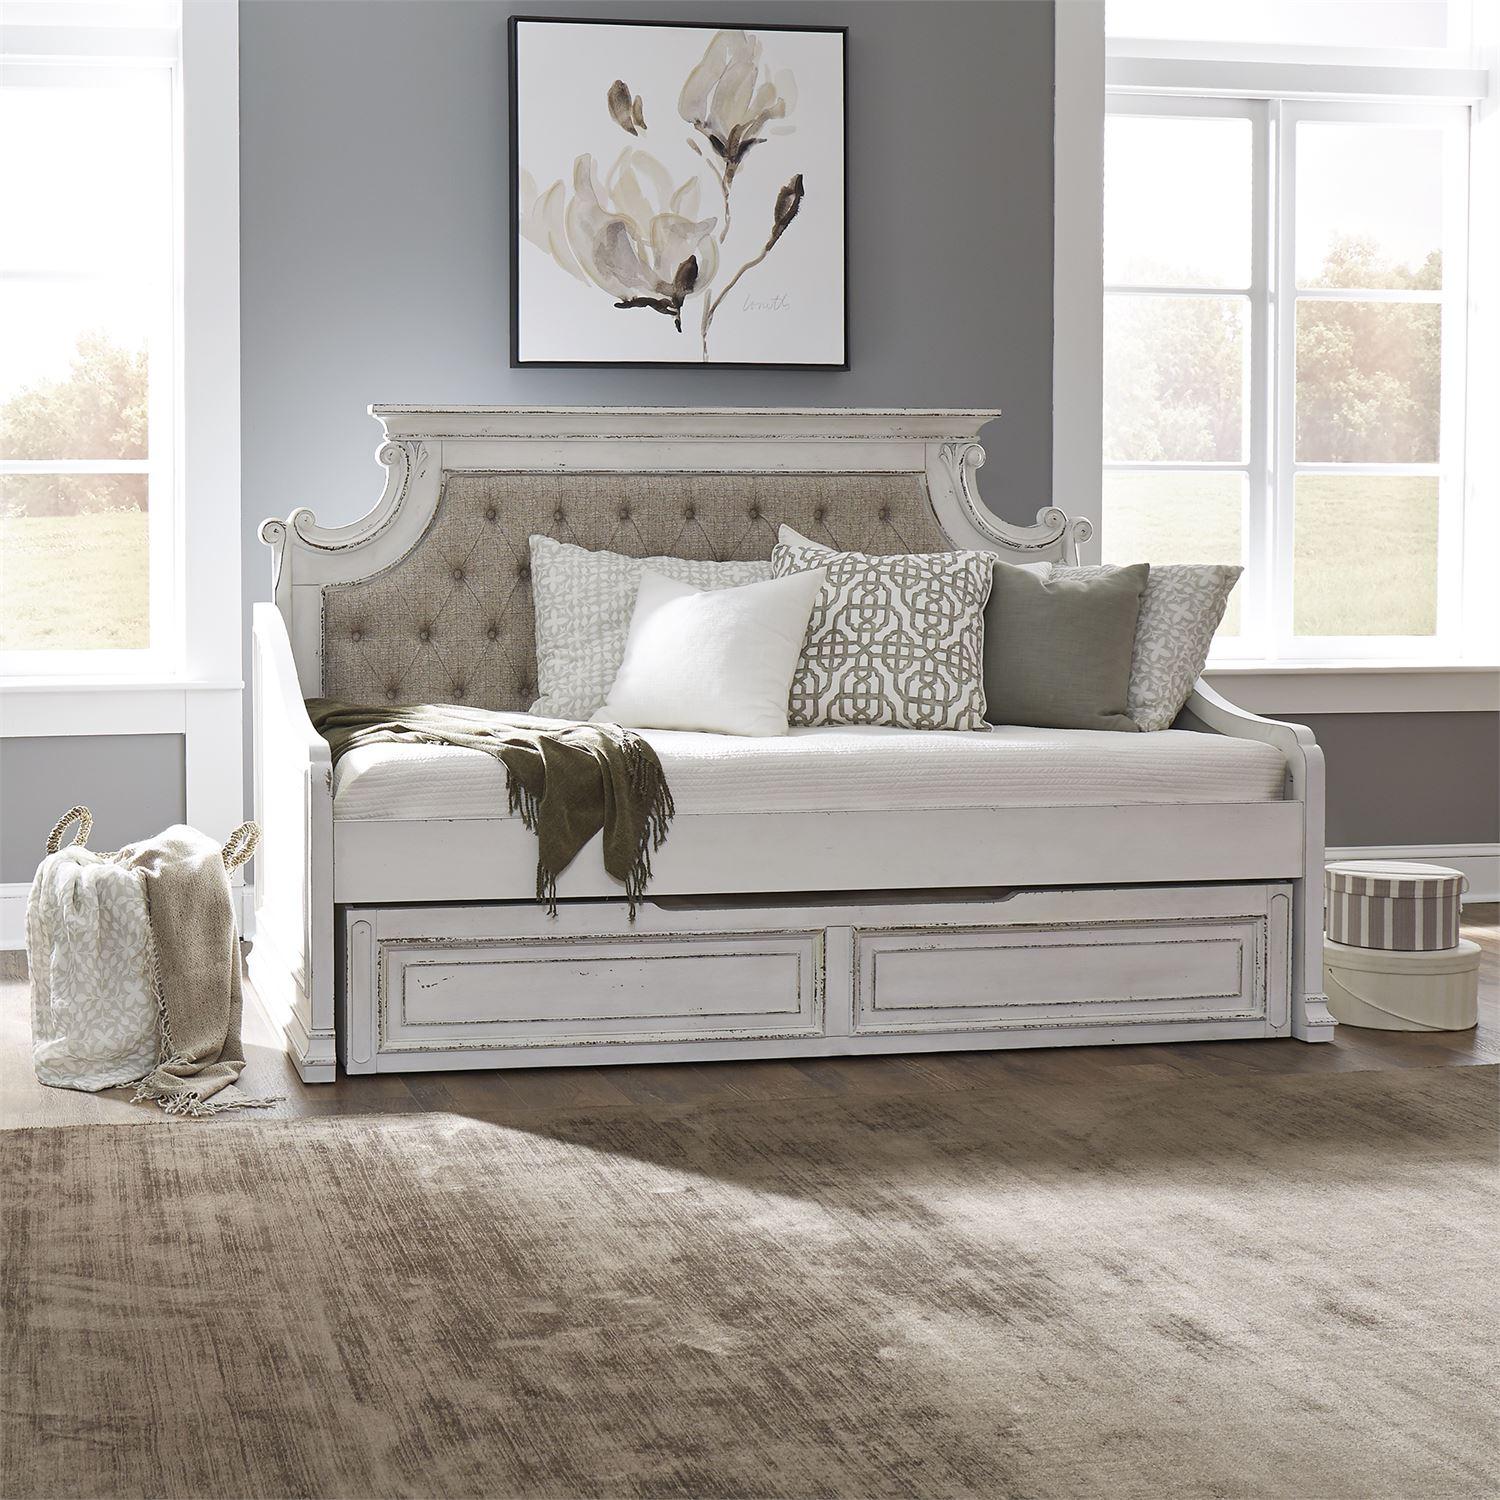 European Traditional Daybed Magnolia Manor  (244-DAY) Daybed 244-DAY-TTR in White Chenille